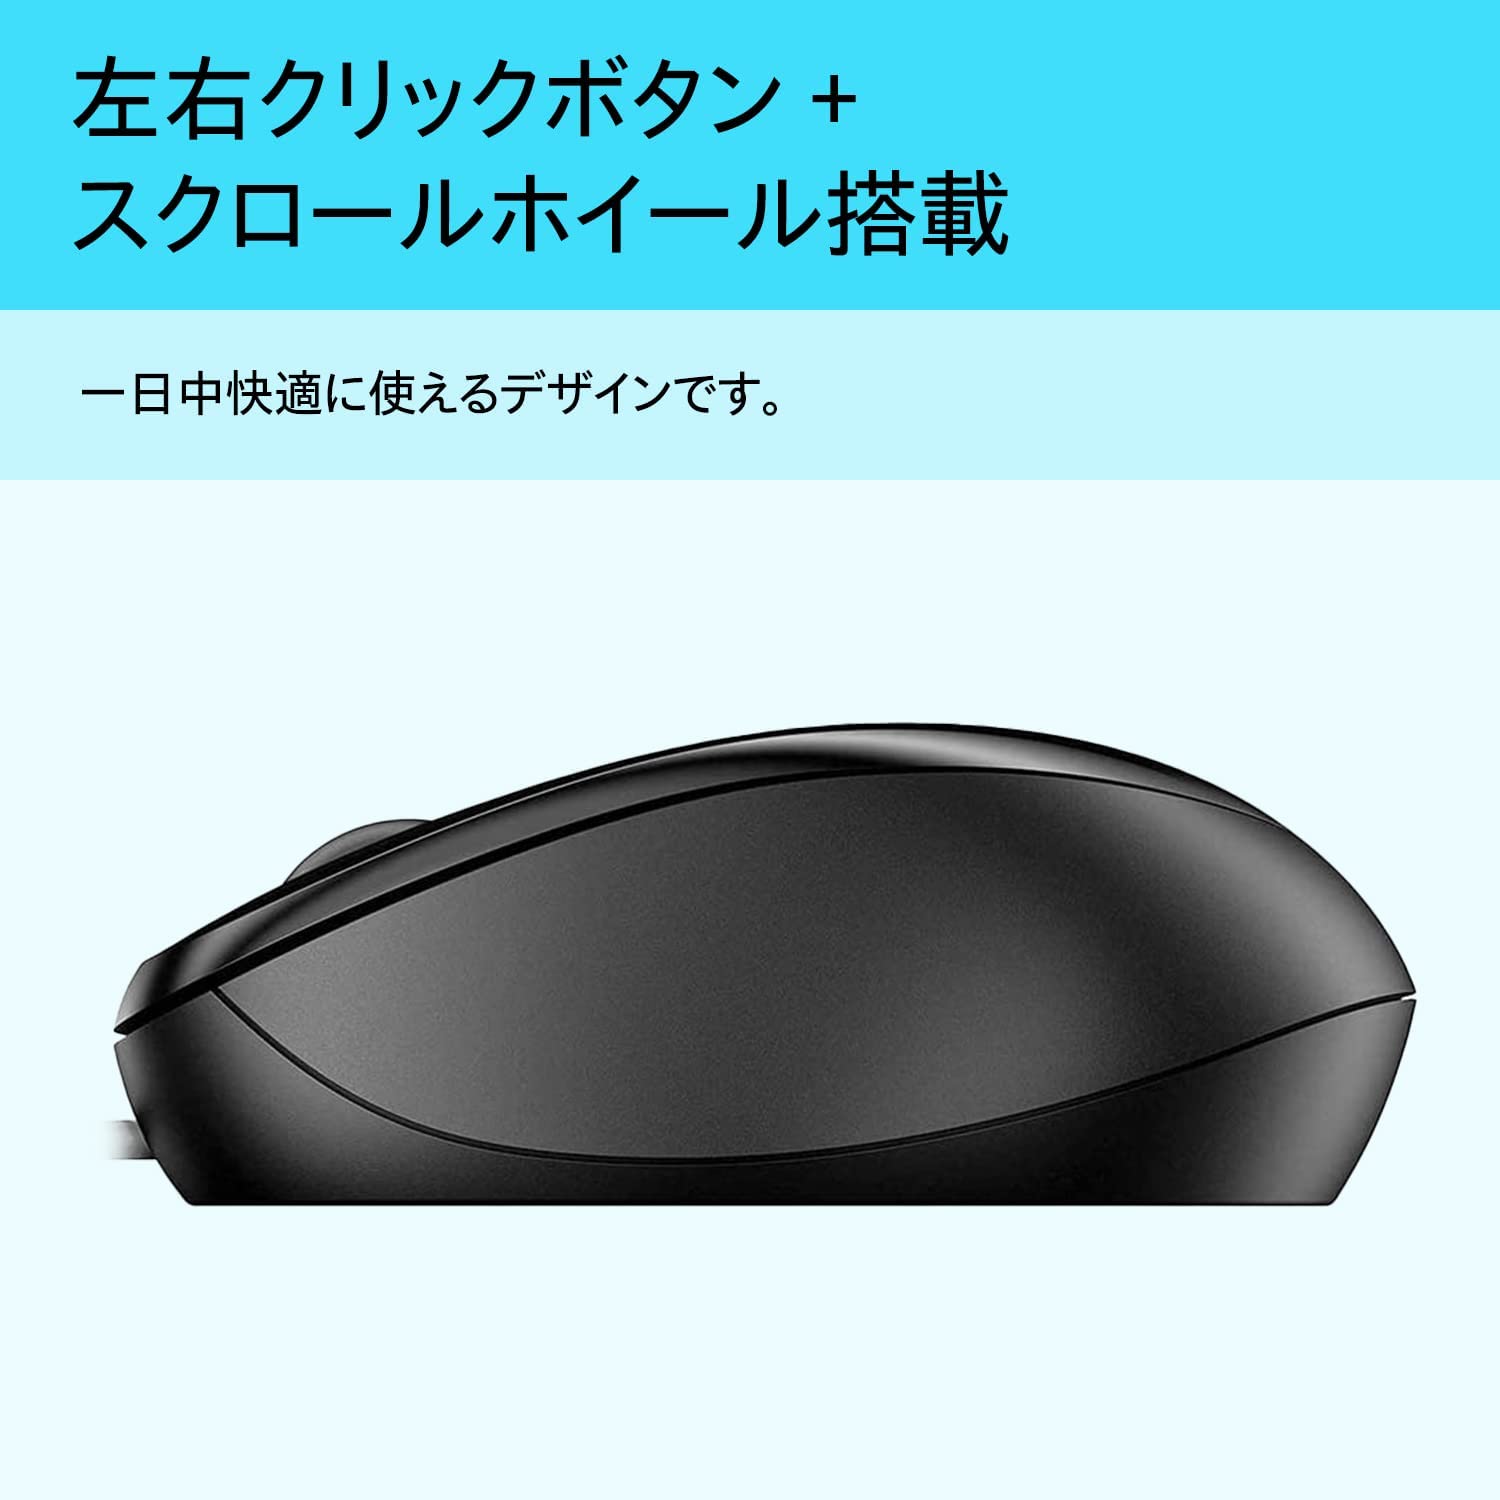 HP Wired Optical Mouse 1000 USB - Black